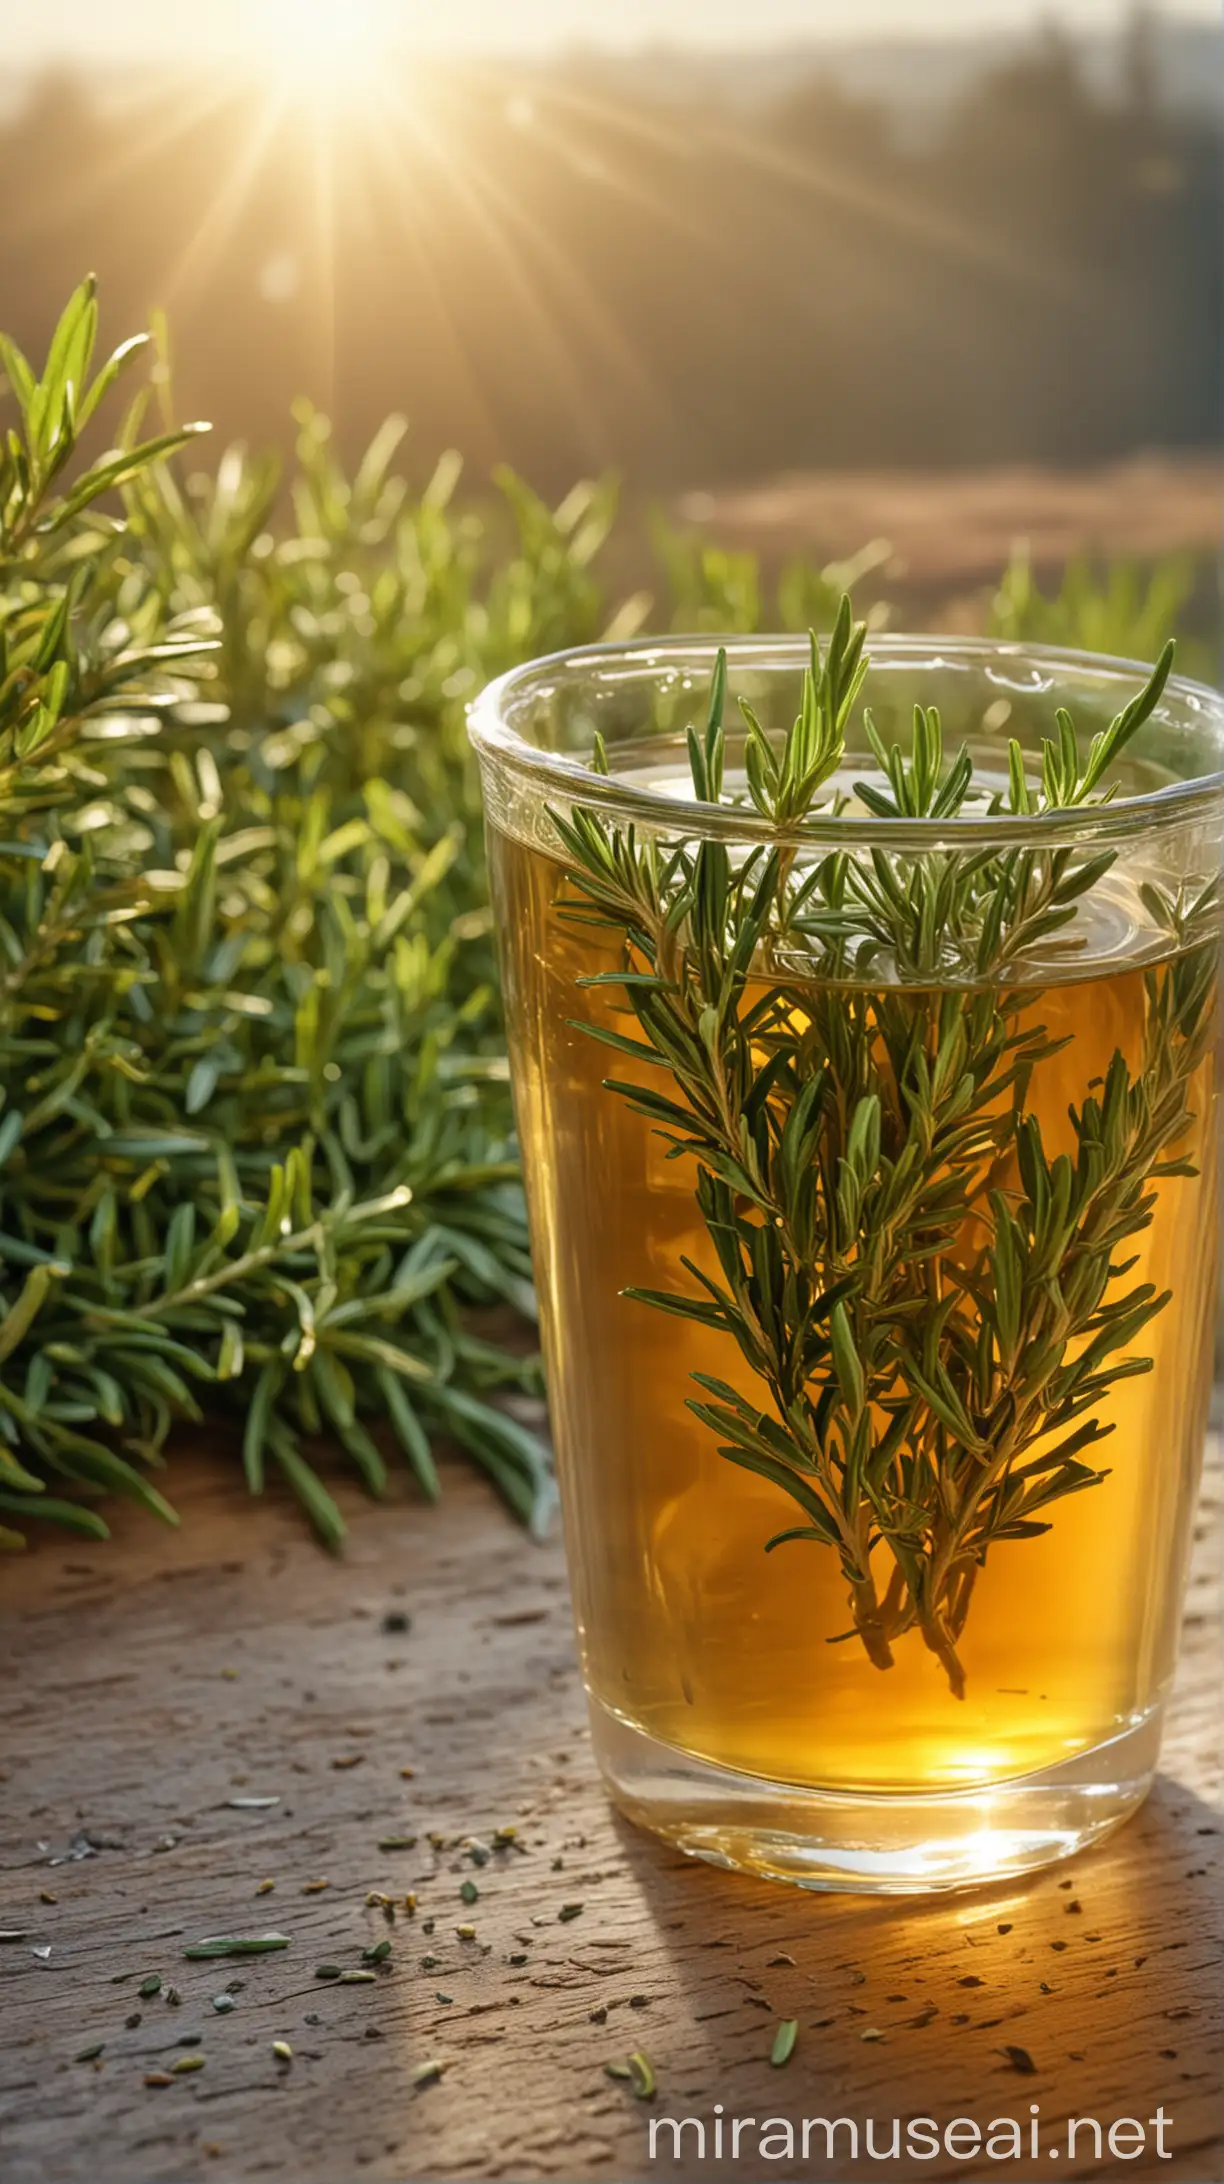 rosemary Tea and in background rosemary Tea, natural background, sun light effect, 4k, HDR, morning time weather